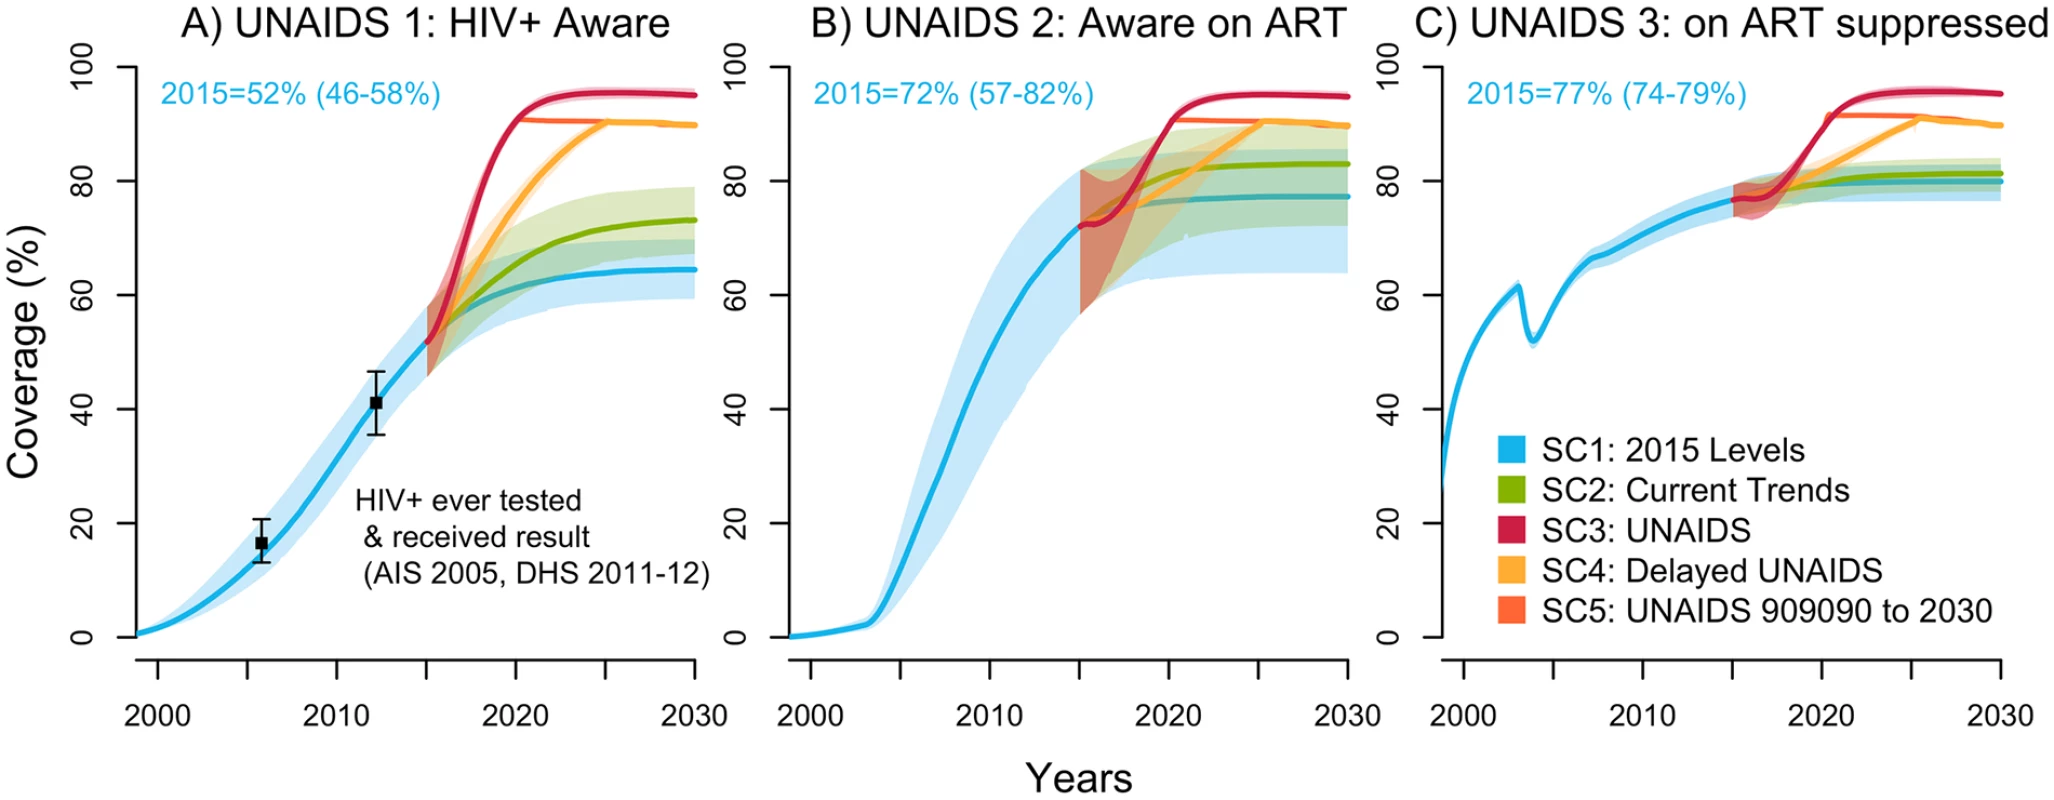 UNAIDS indicators under selected intervention scenarios among the population aged 15–59 years in Côte d’Ivoire (median with 95% credible intervals).